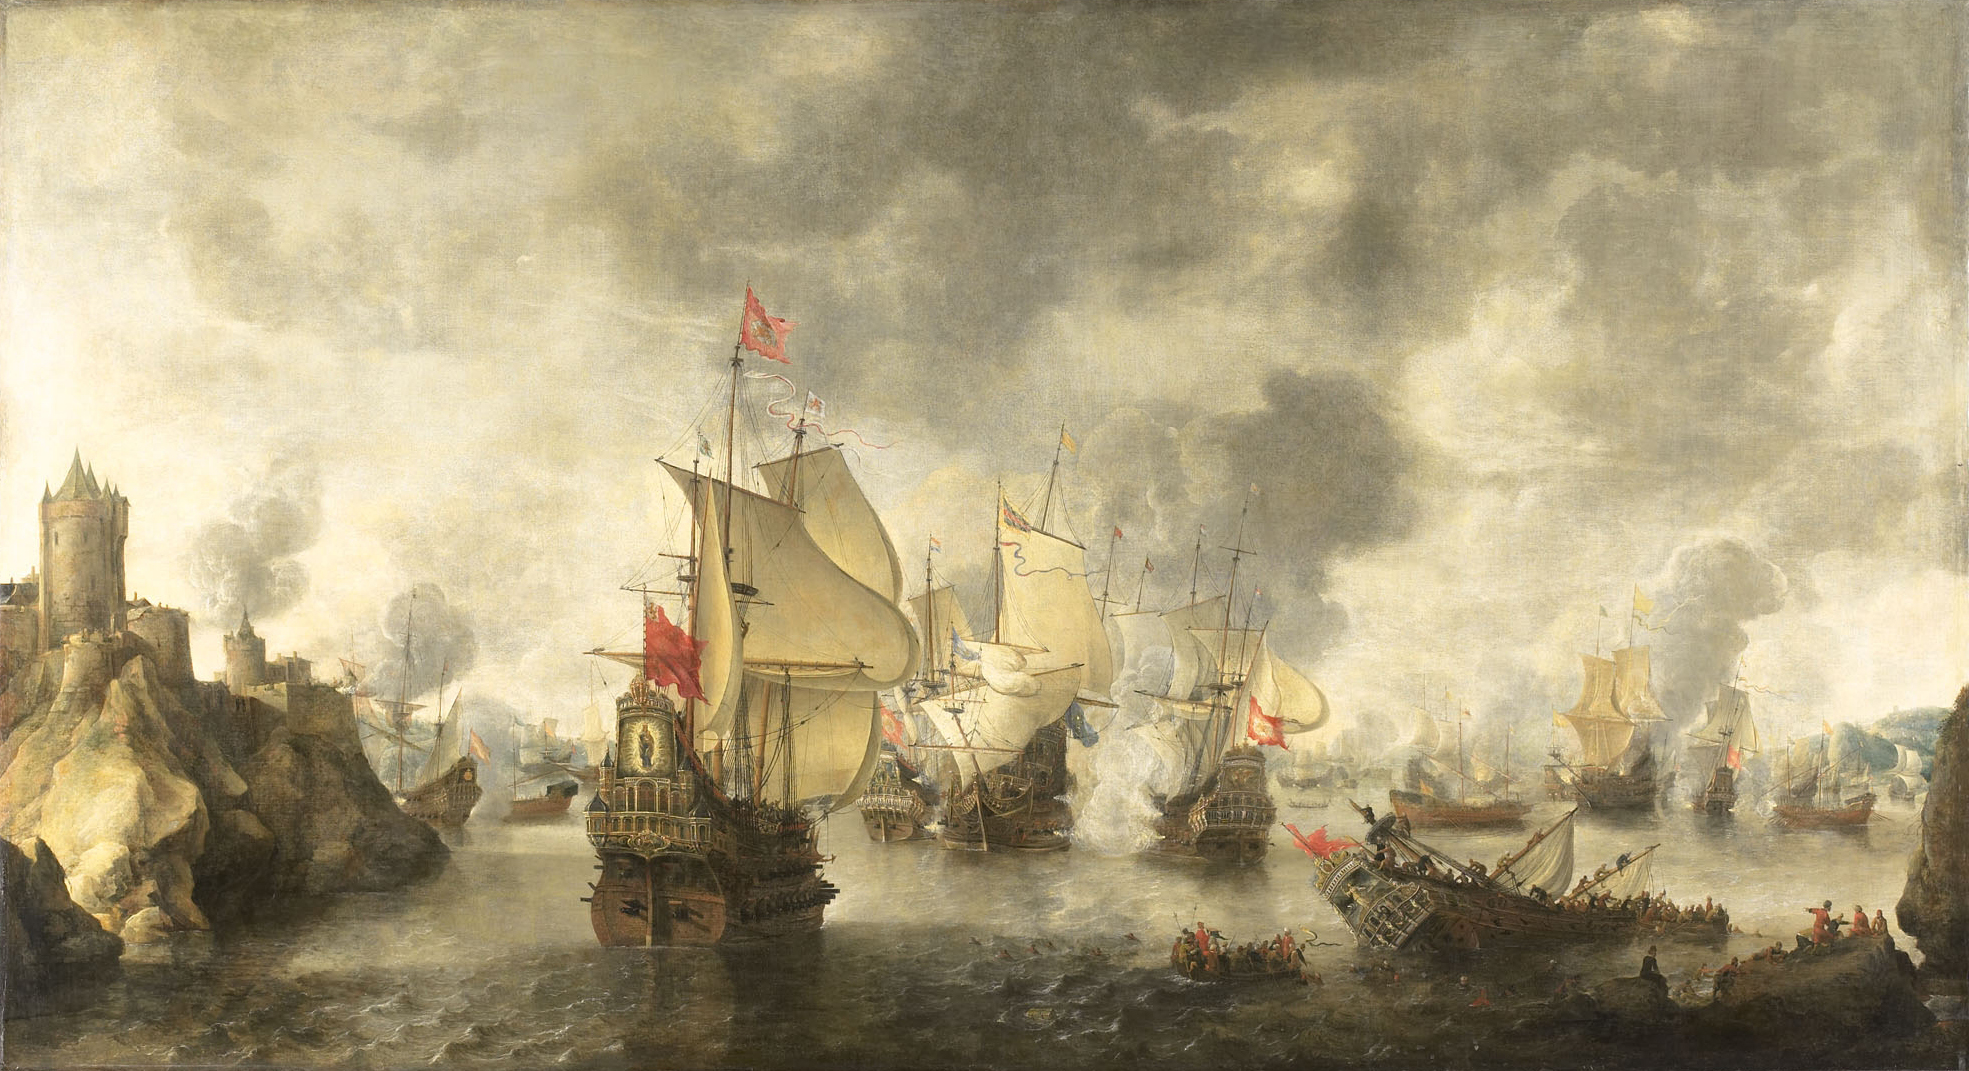 Battle of the combined Venetian and Dutch fleets against the Turks in the Bay of Foja 1649 (Abraham Beerstratenm, 1656)